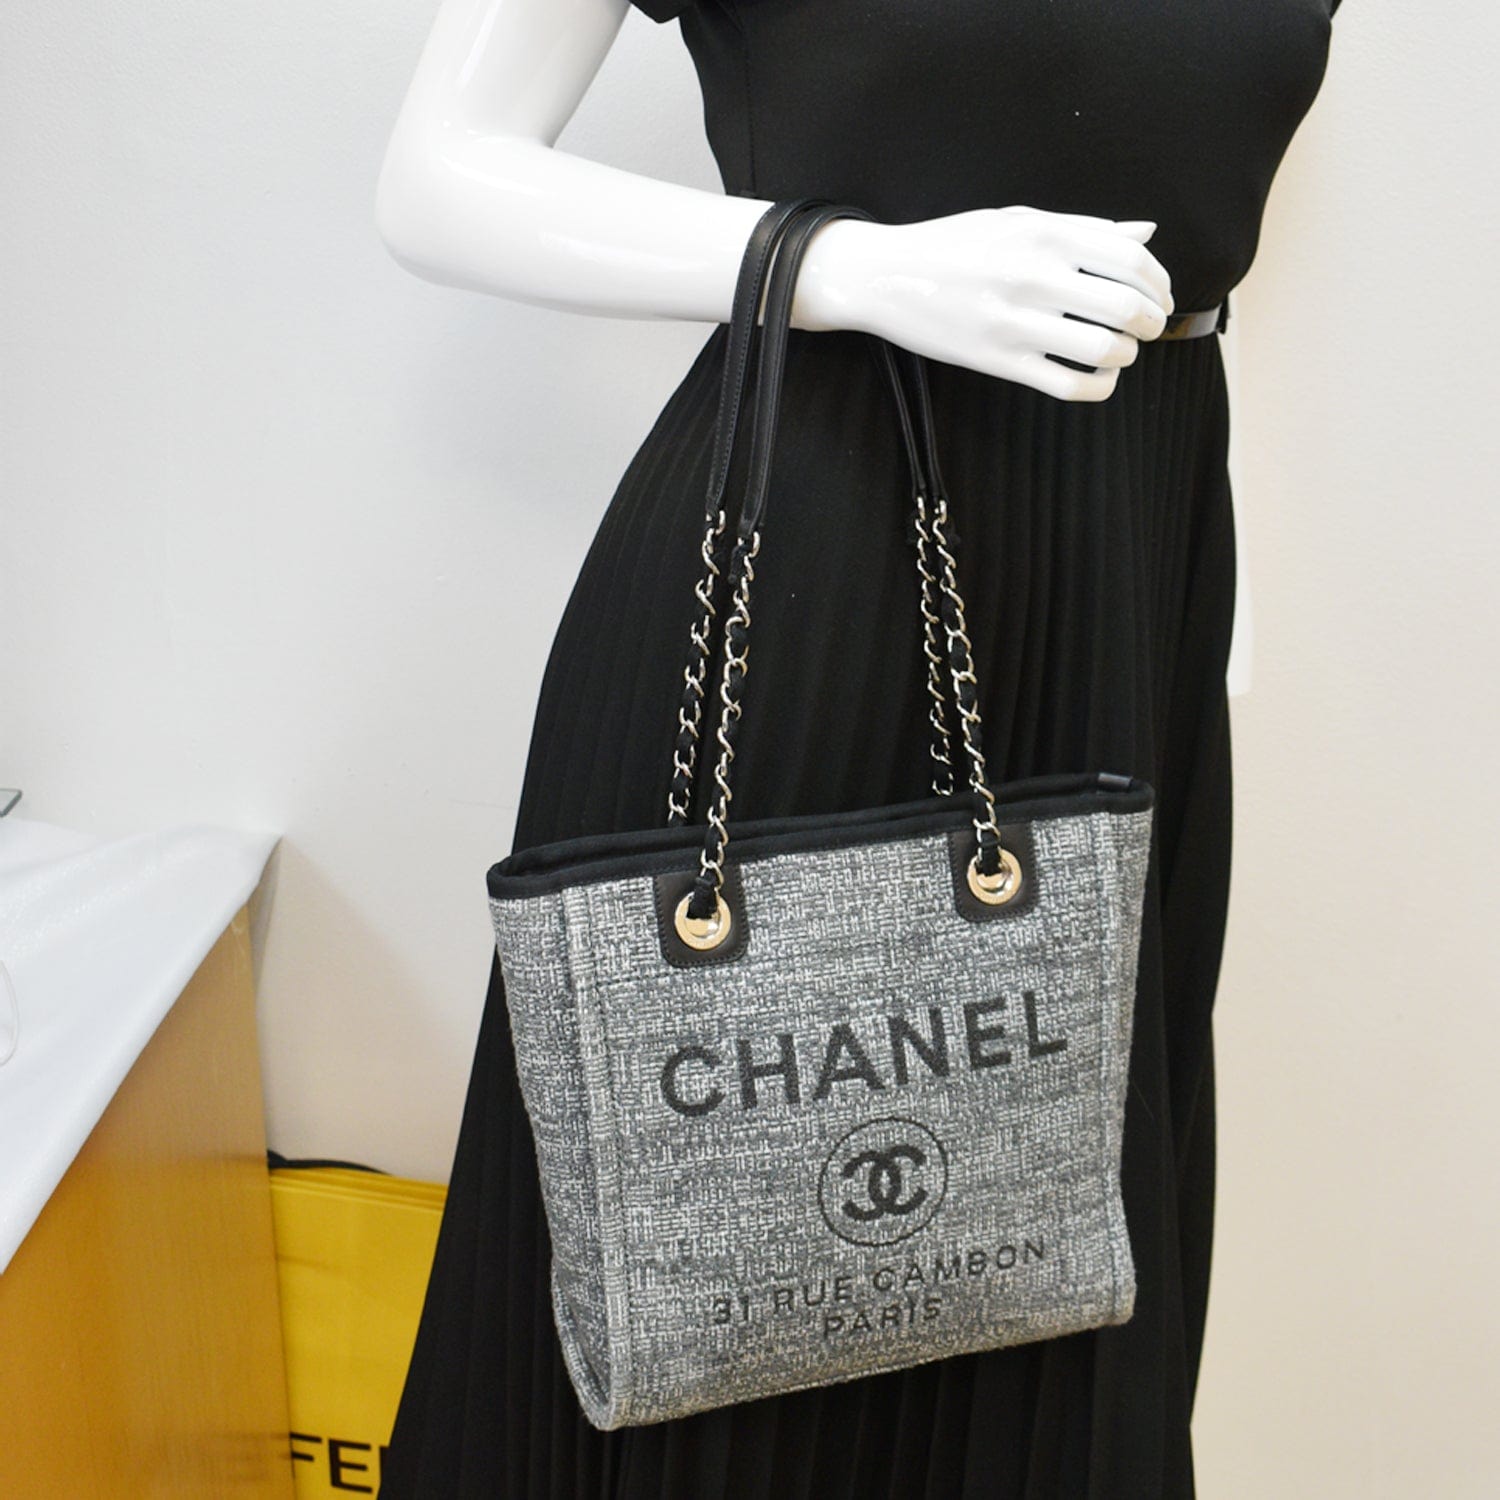 Chanel Black/Grey Canvas Leather Medium Deauville Tote Bag Chanel